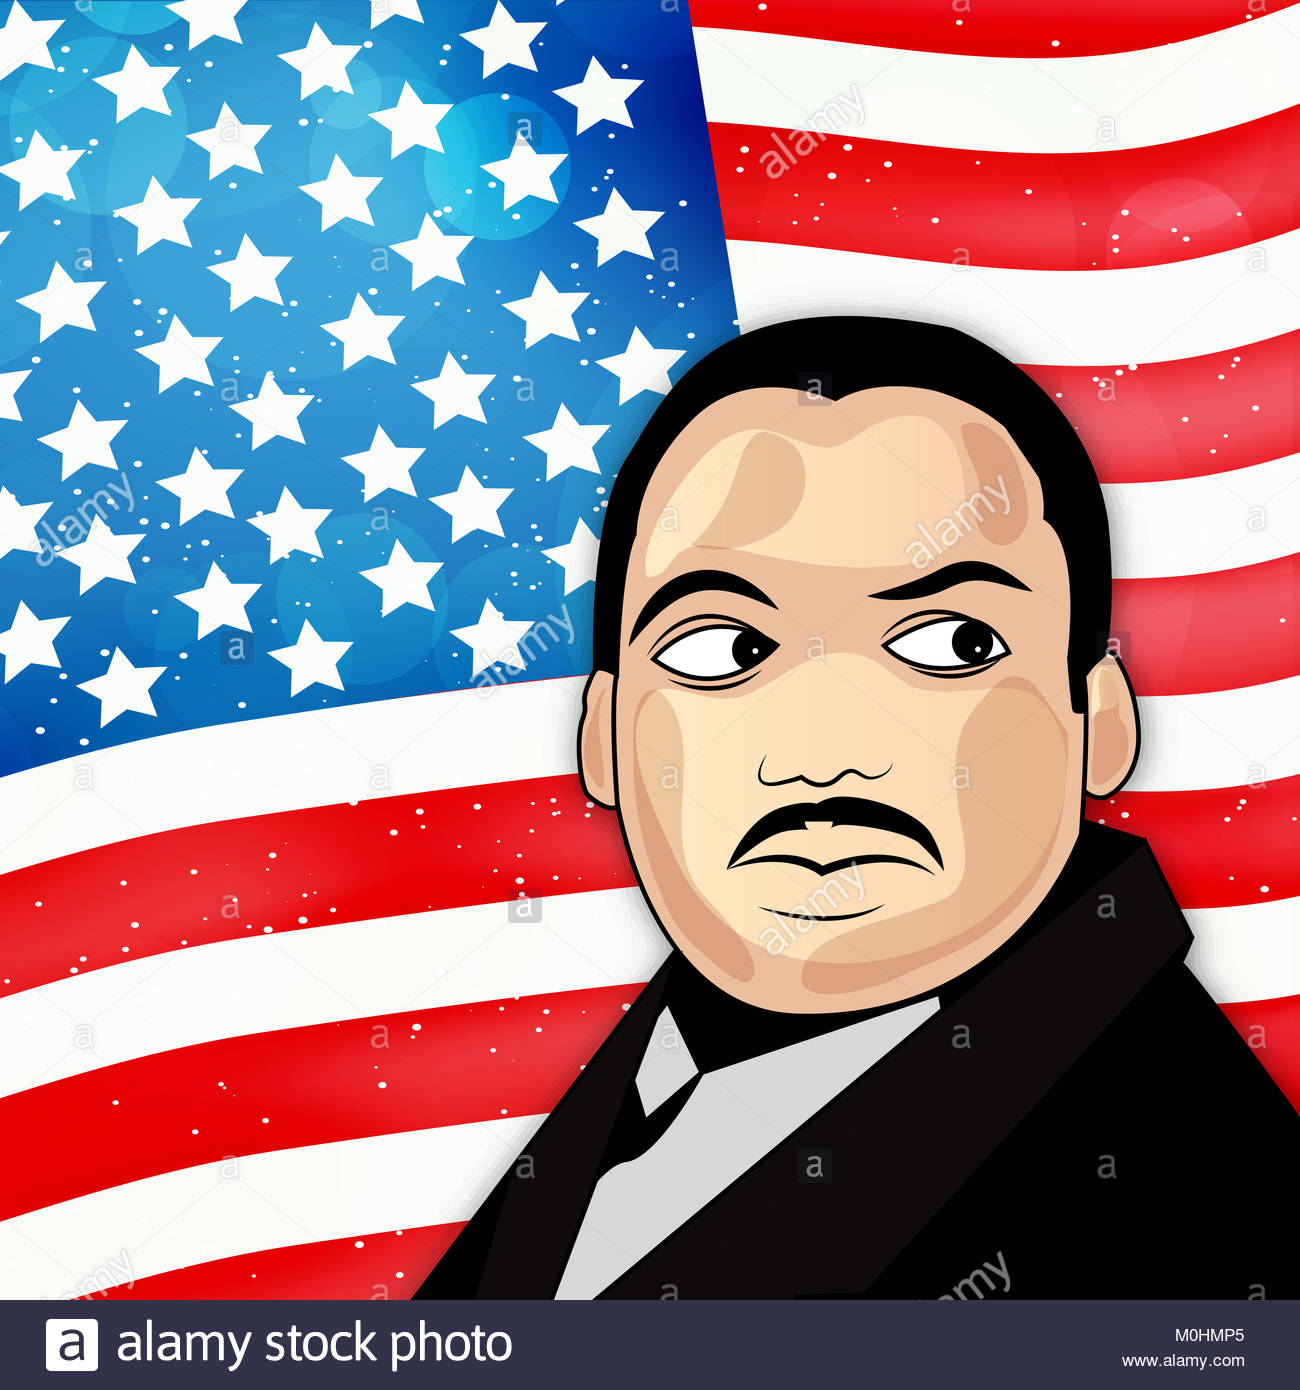 Illustration Of Martin Luther King Day Background Stock Photo